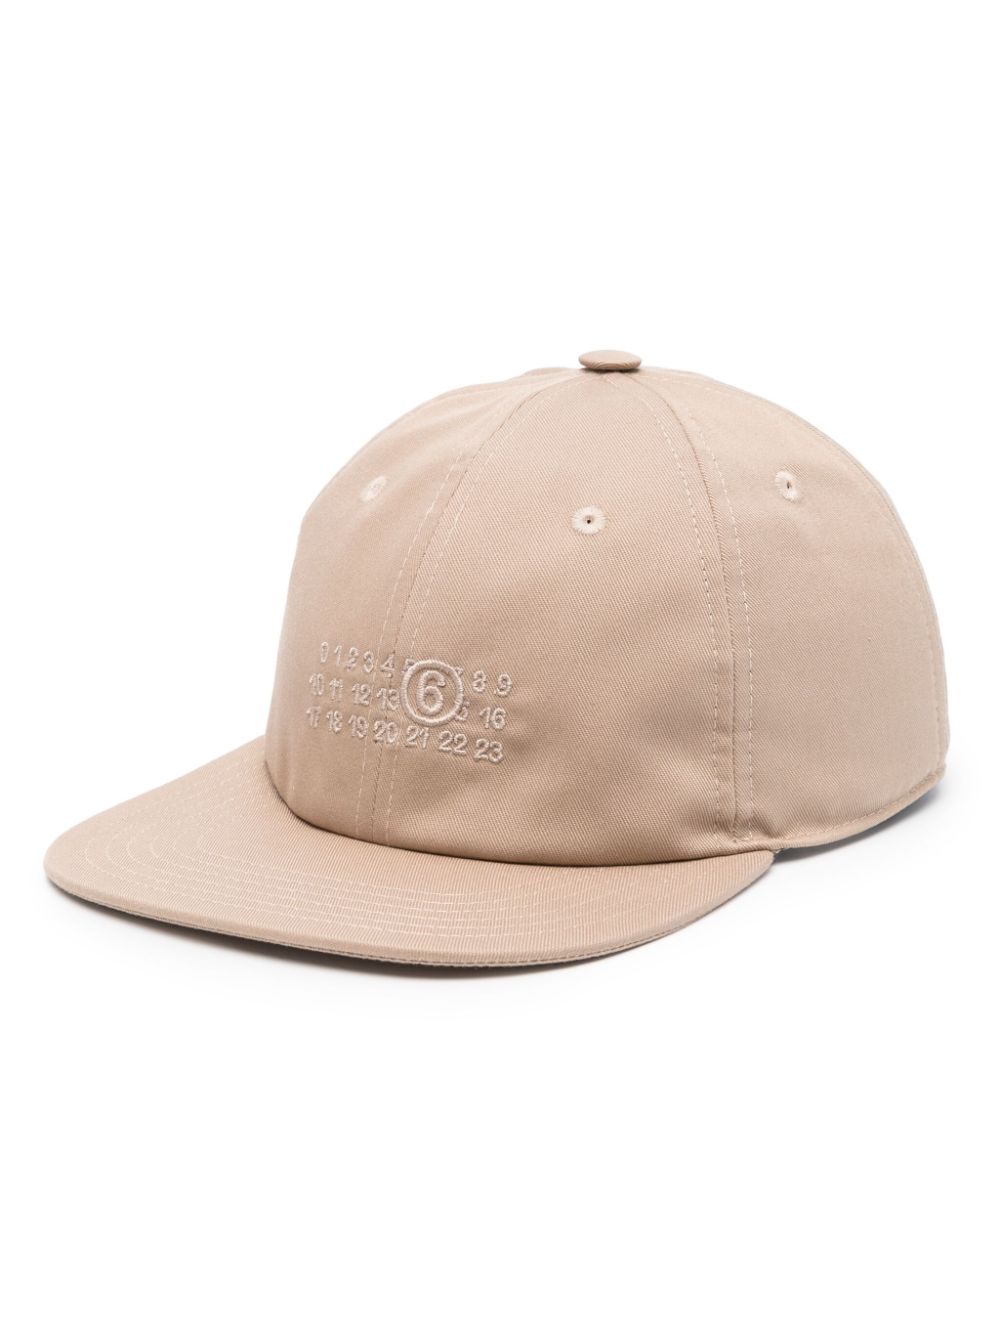 MM6 Maison Margiela signature-numbers embroidered cap - Nude